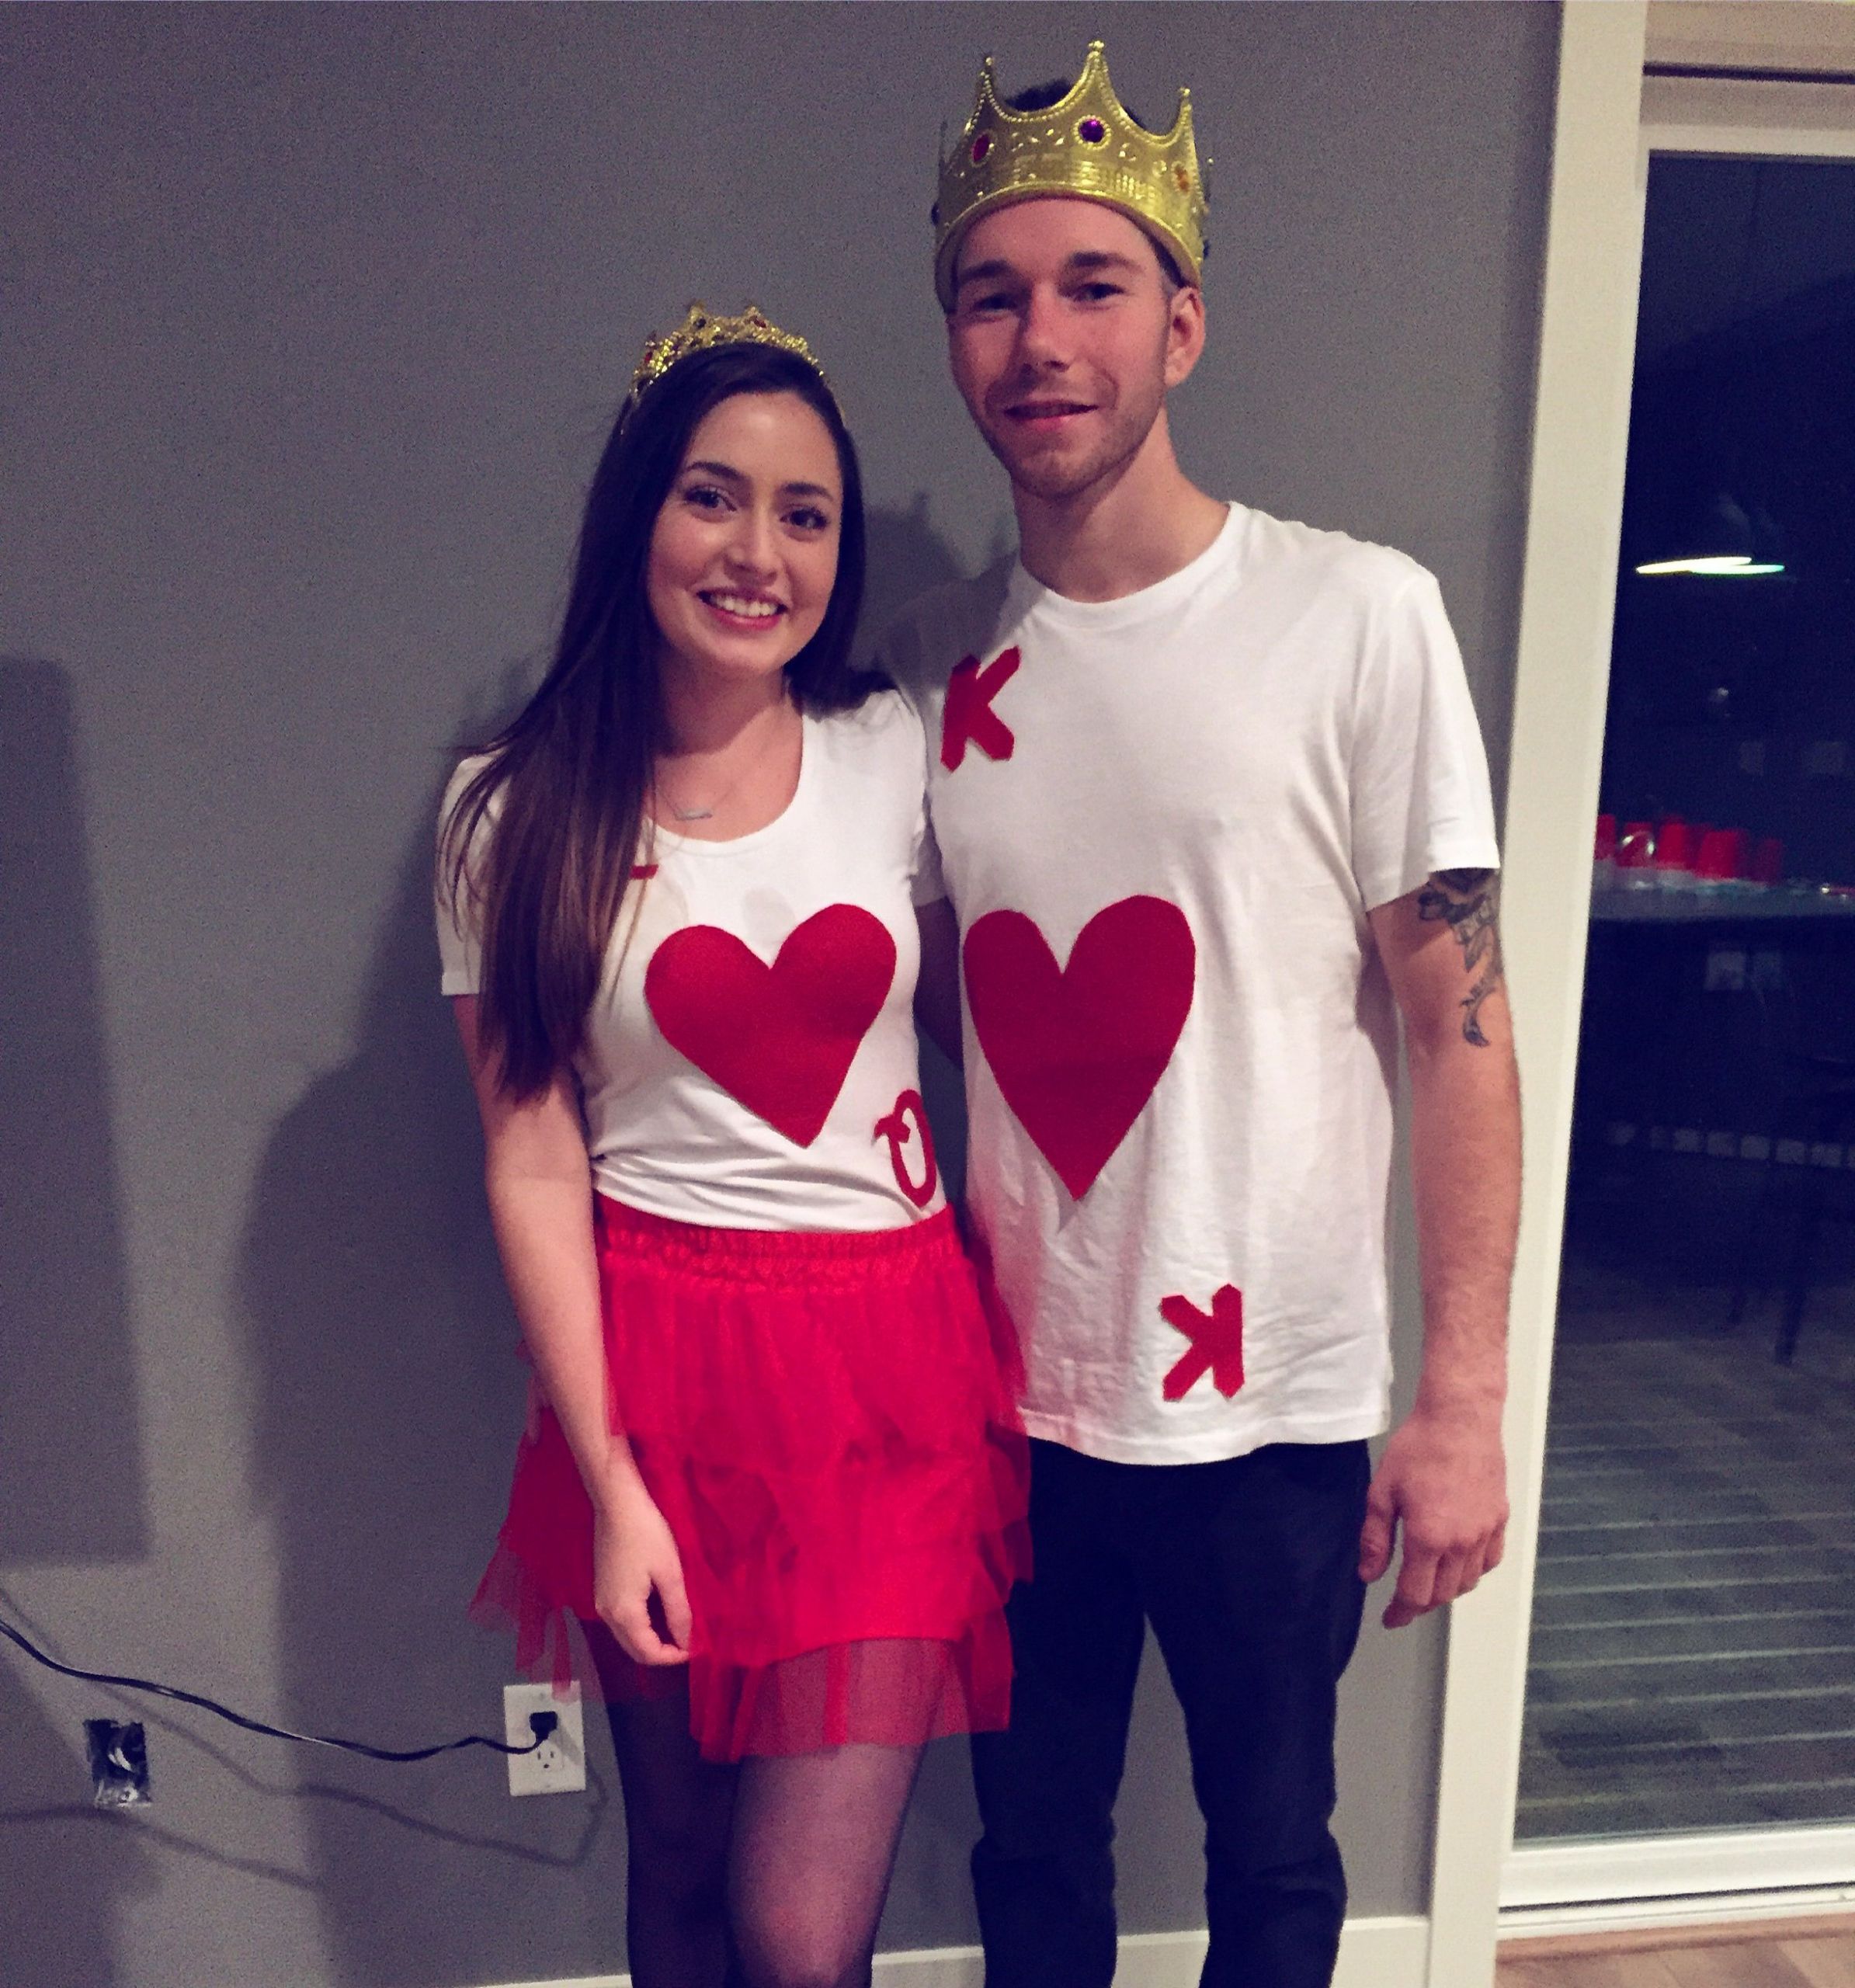 Couples Diy Halloween Costumes
 25 Days of Fall DIY Day 22 Couples Costumes